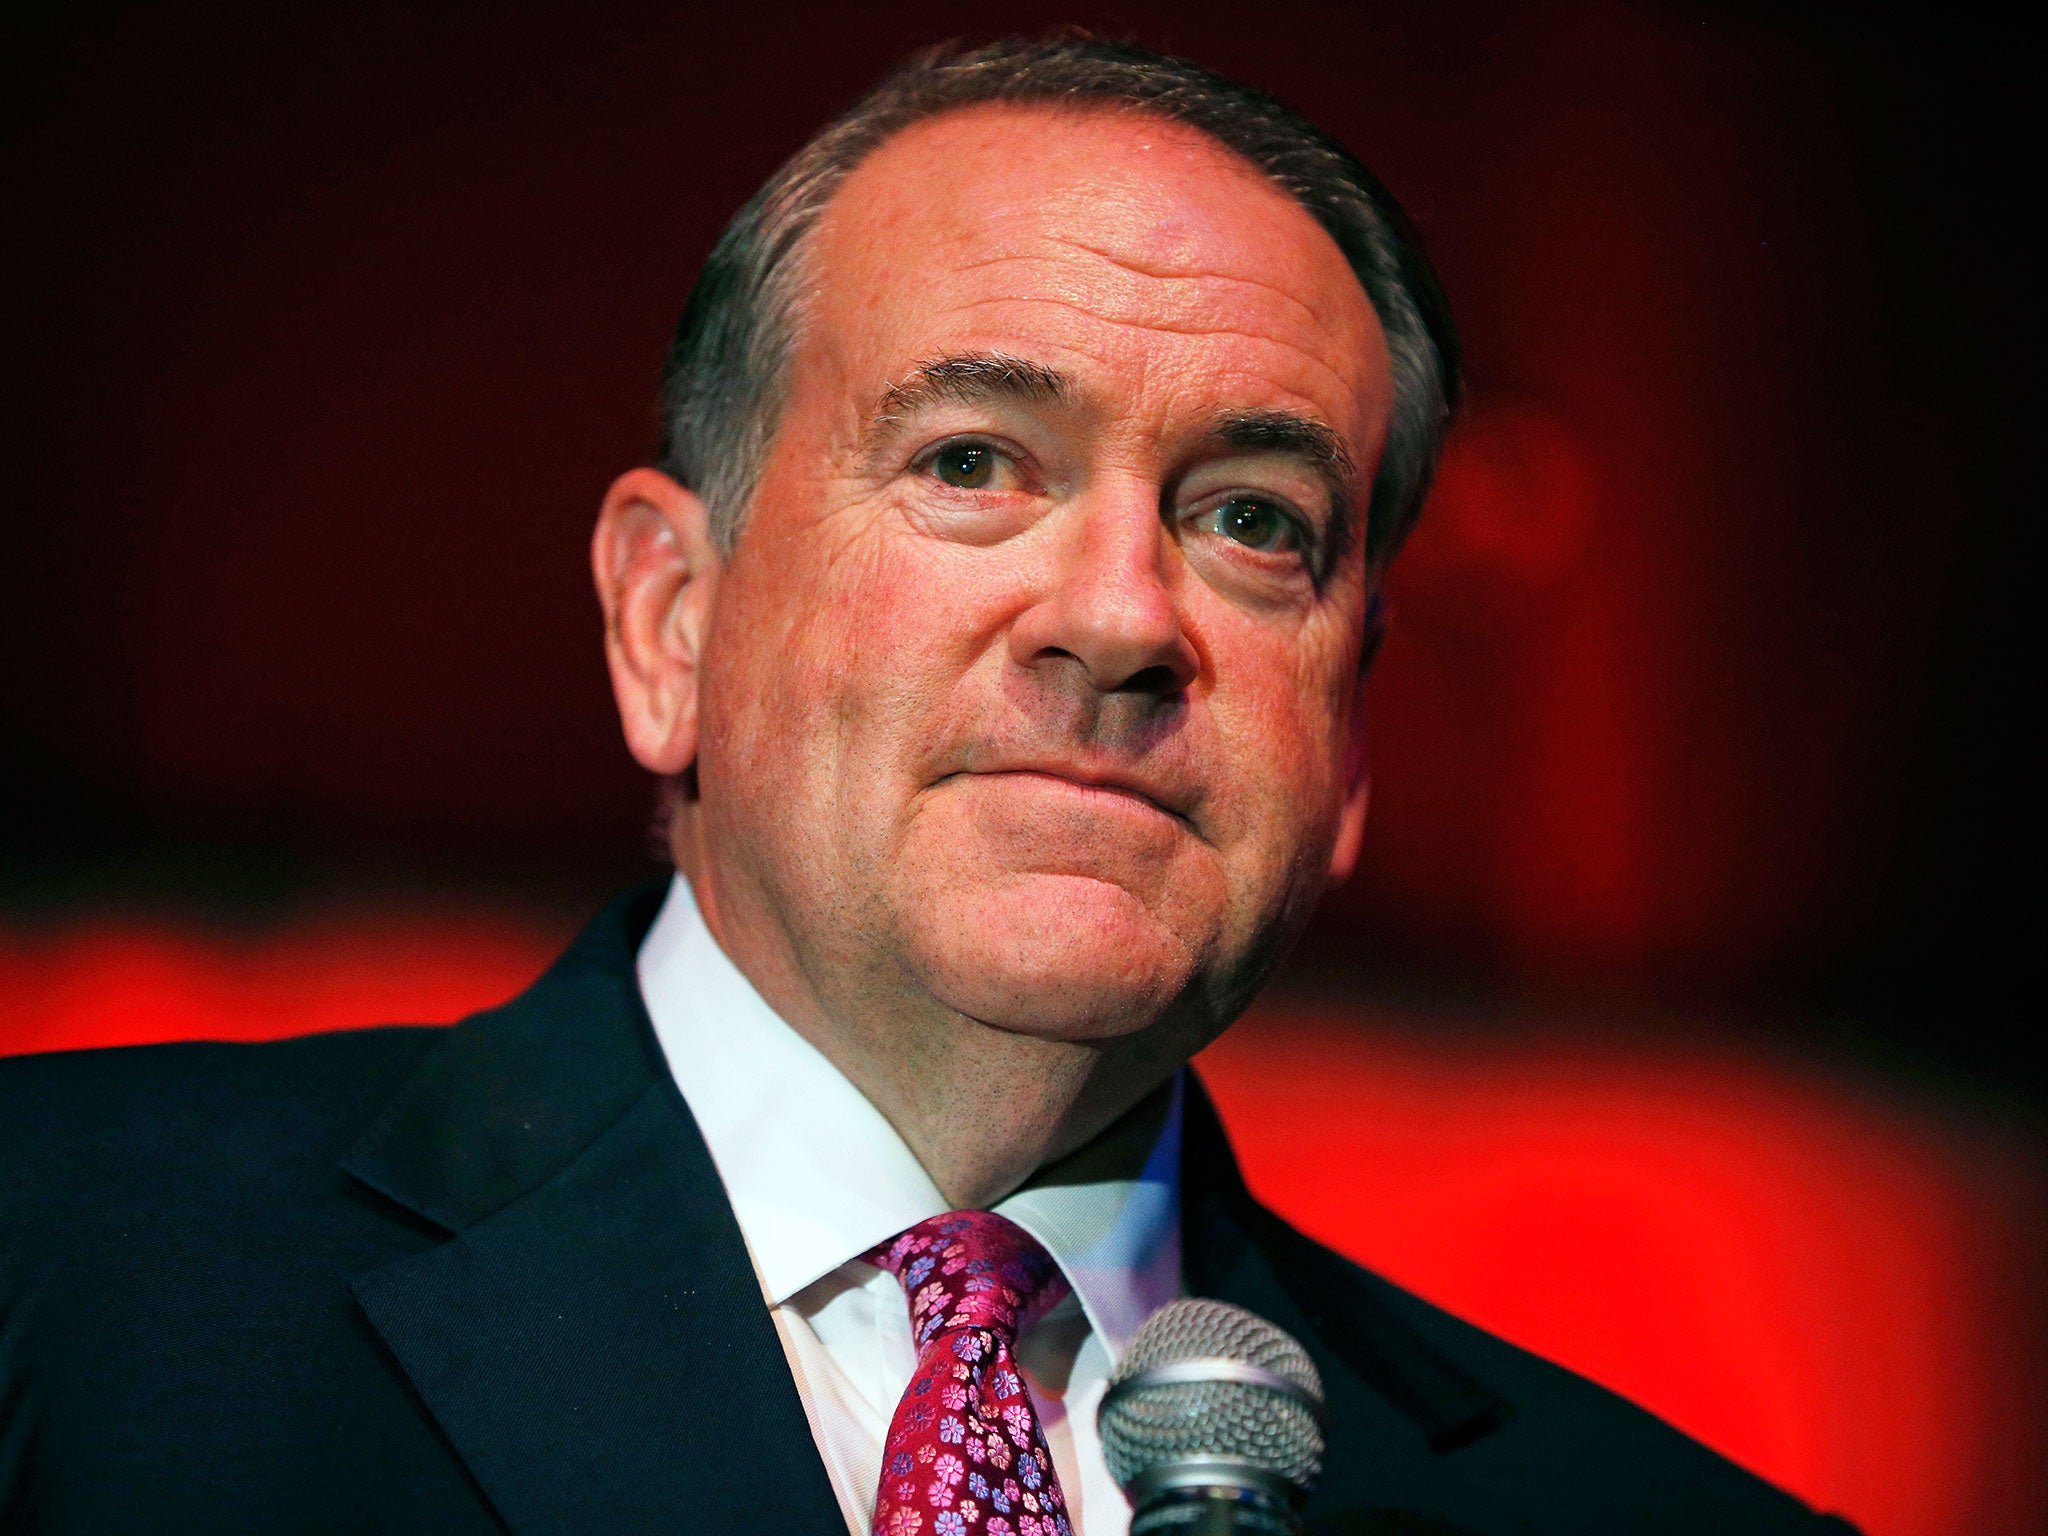 Mike Huckabee branded the historic accord ‘idiotic’